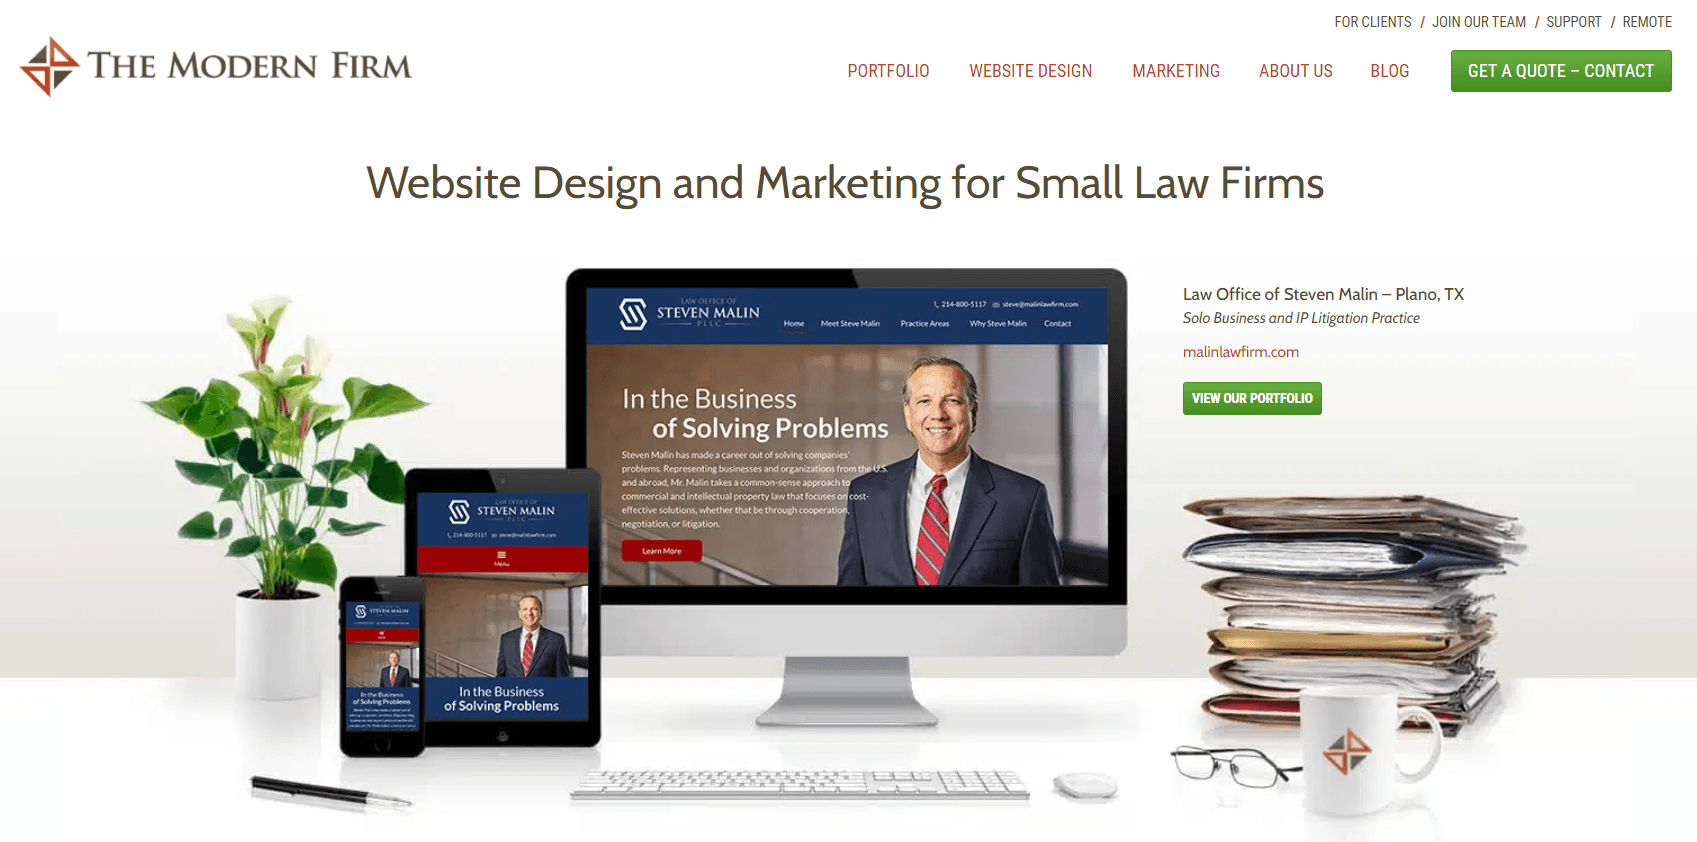 The Modern Firm Website Homepage